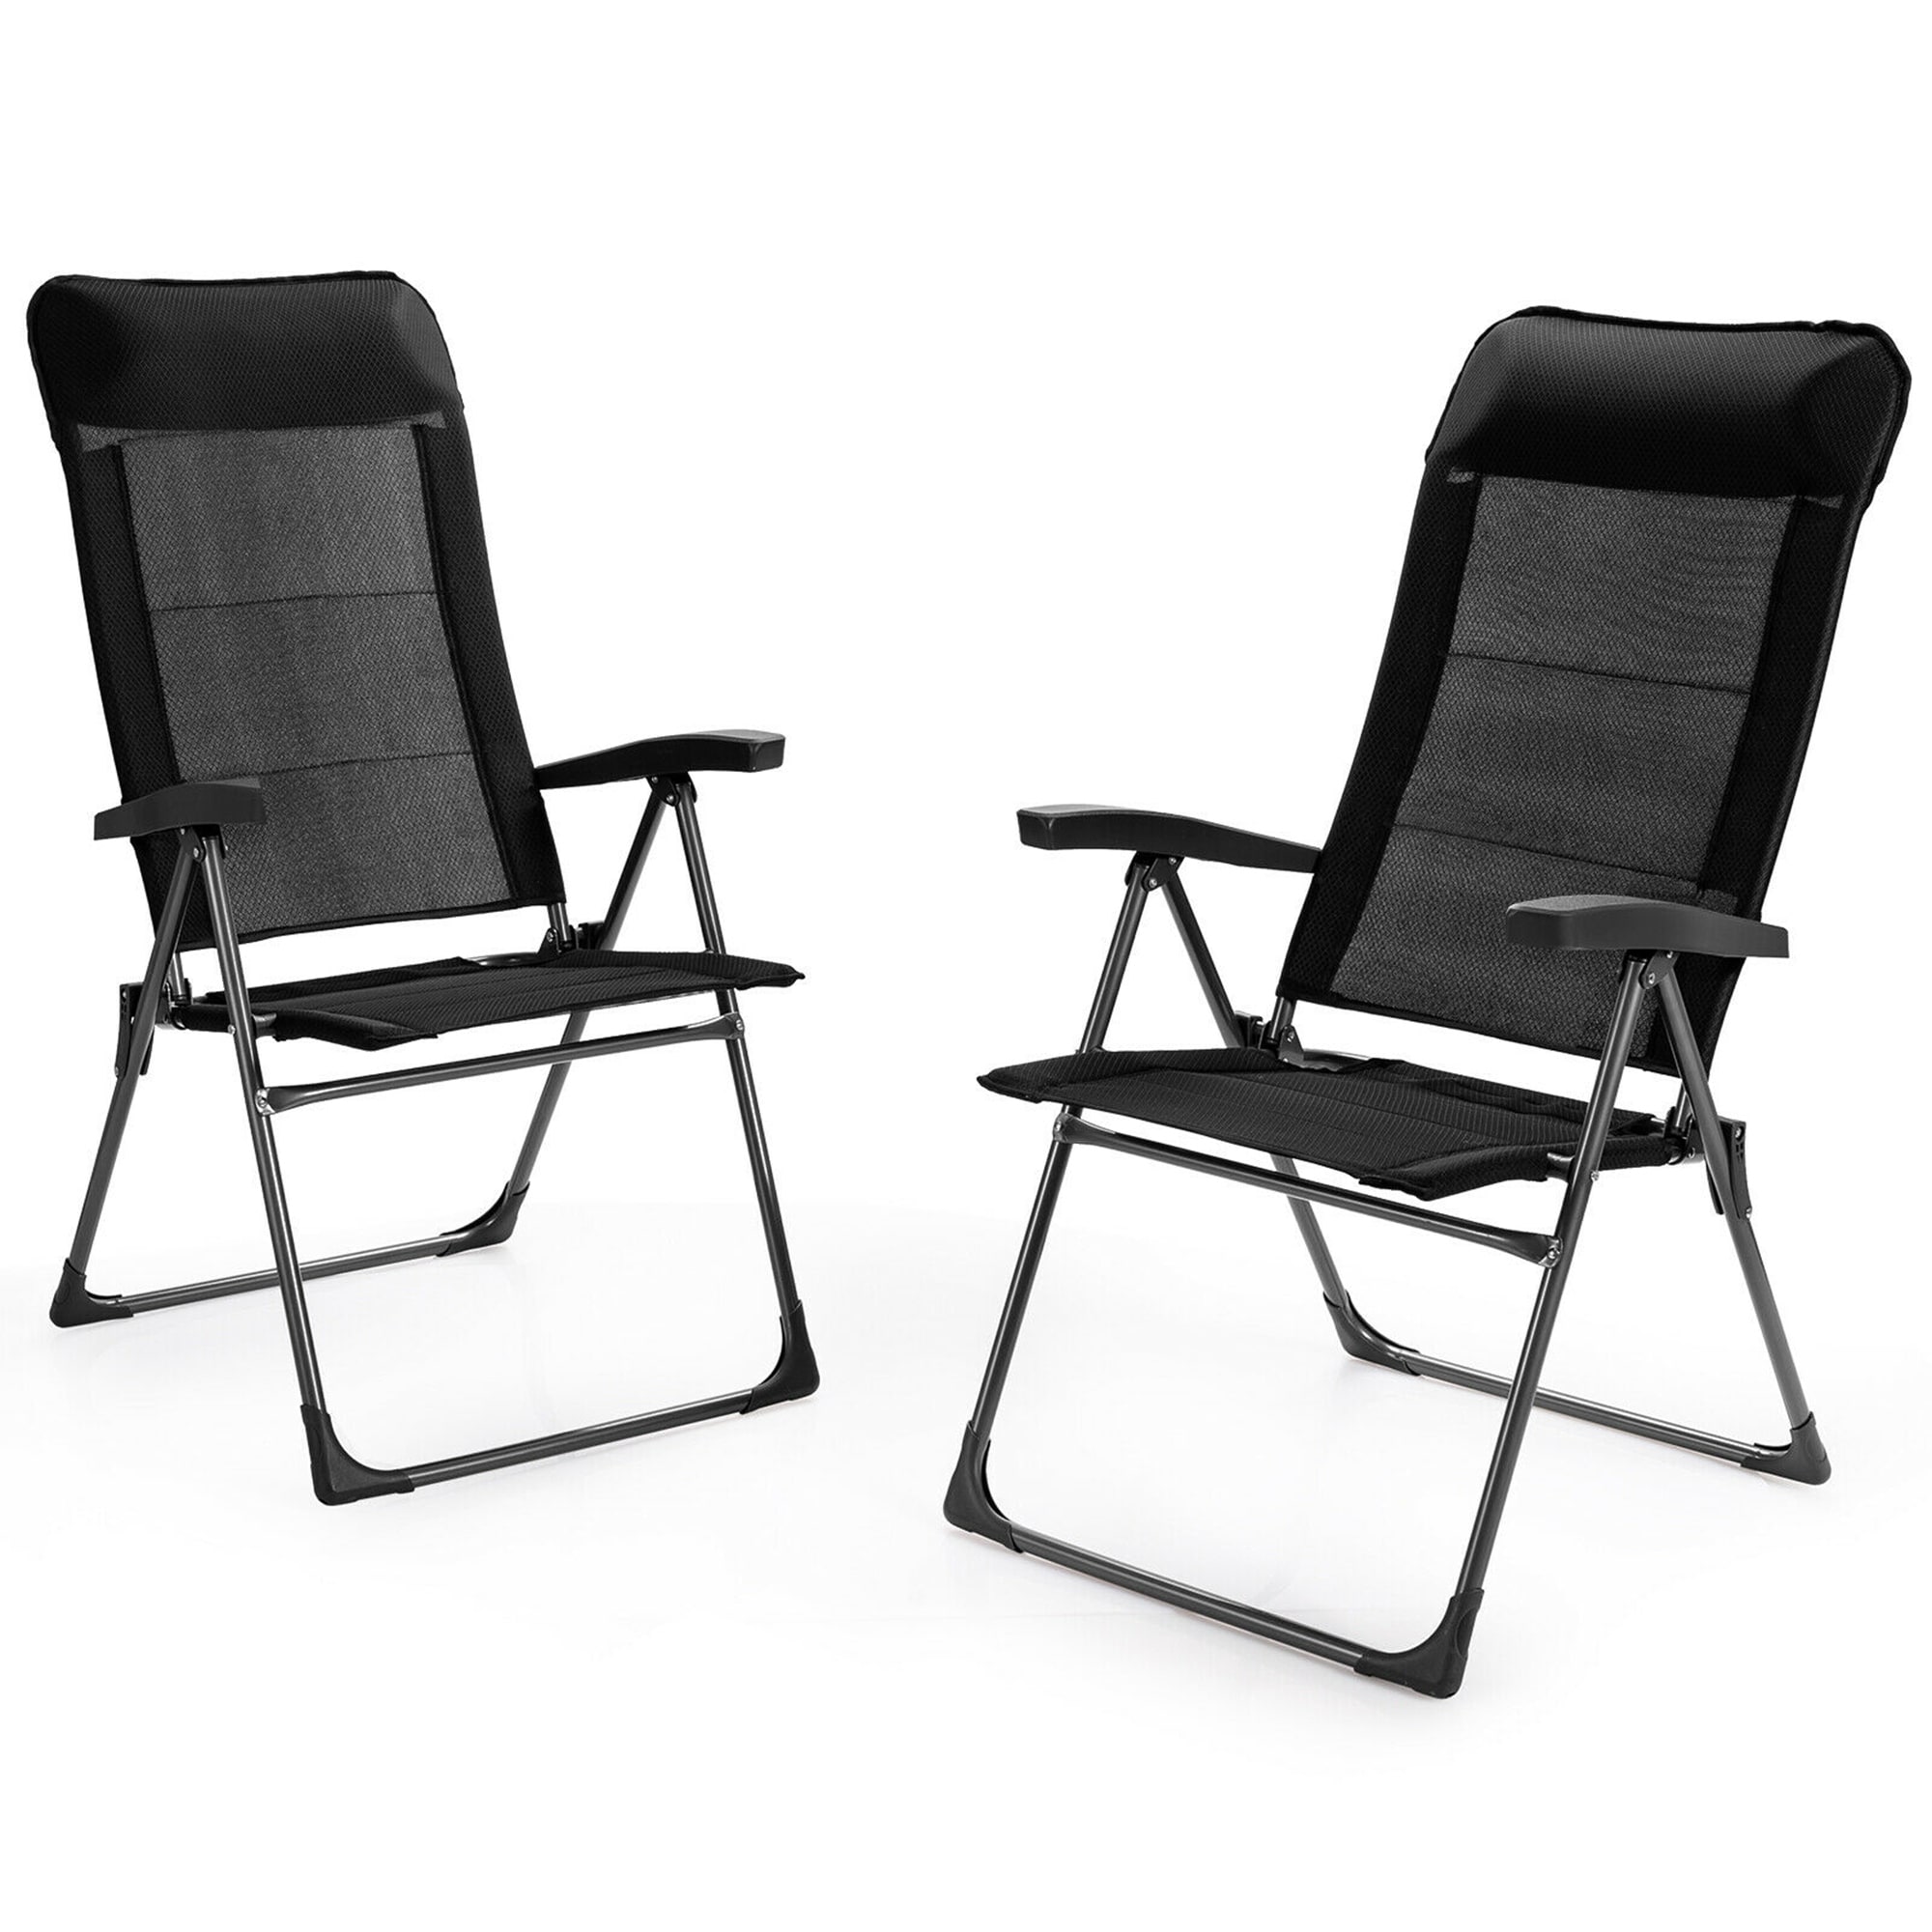 2pcs Patio Dining Chairs Folding Outdoor Lawn Chairs Camping Chairs